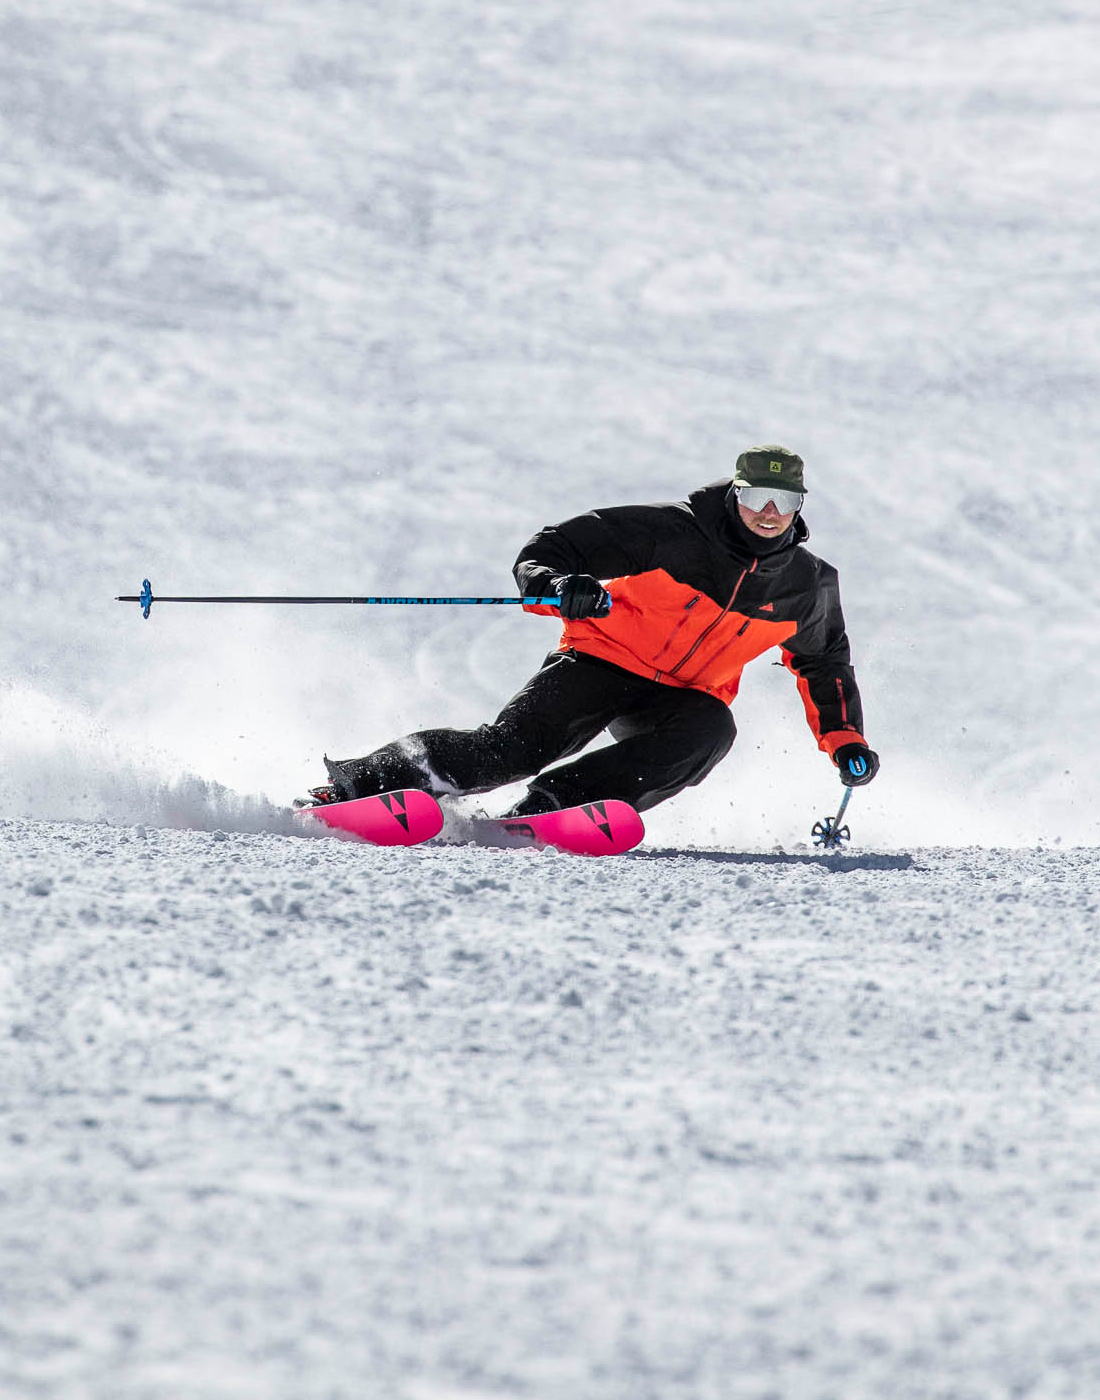 This new product is the ultimate knee protection for skiers